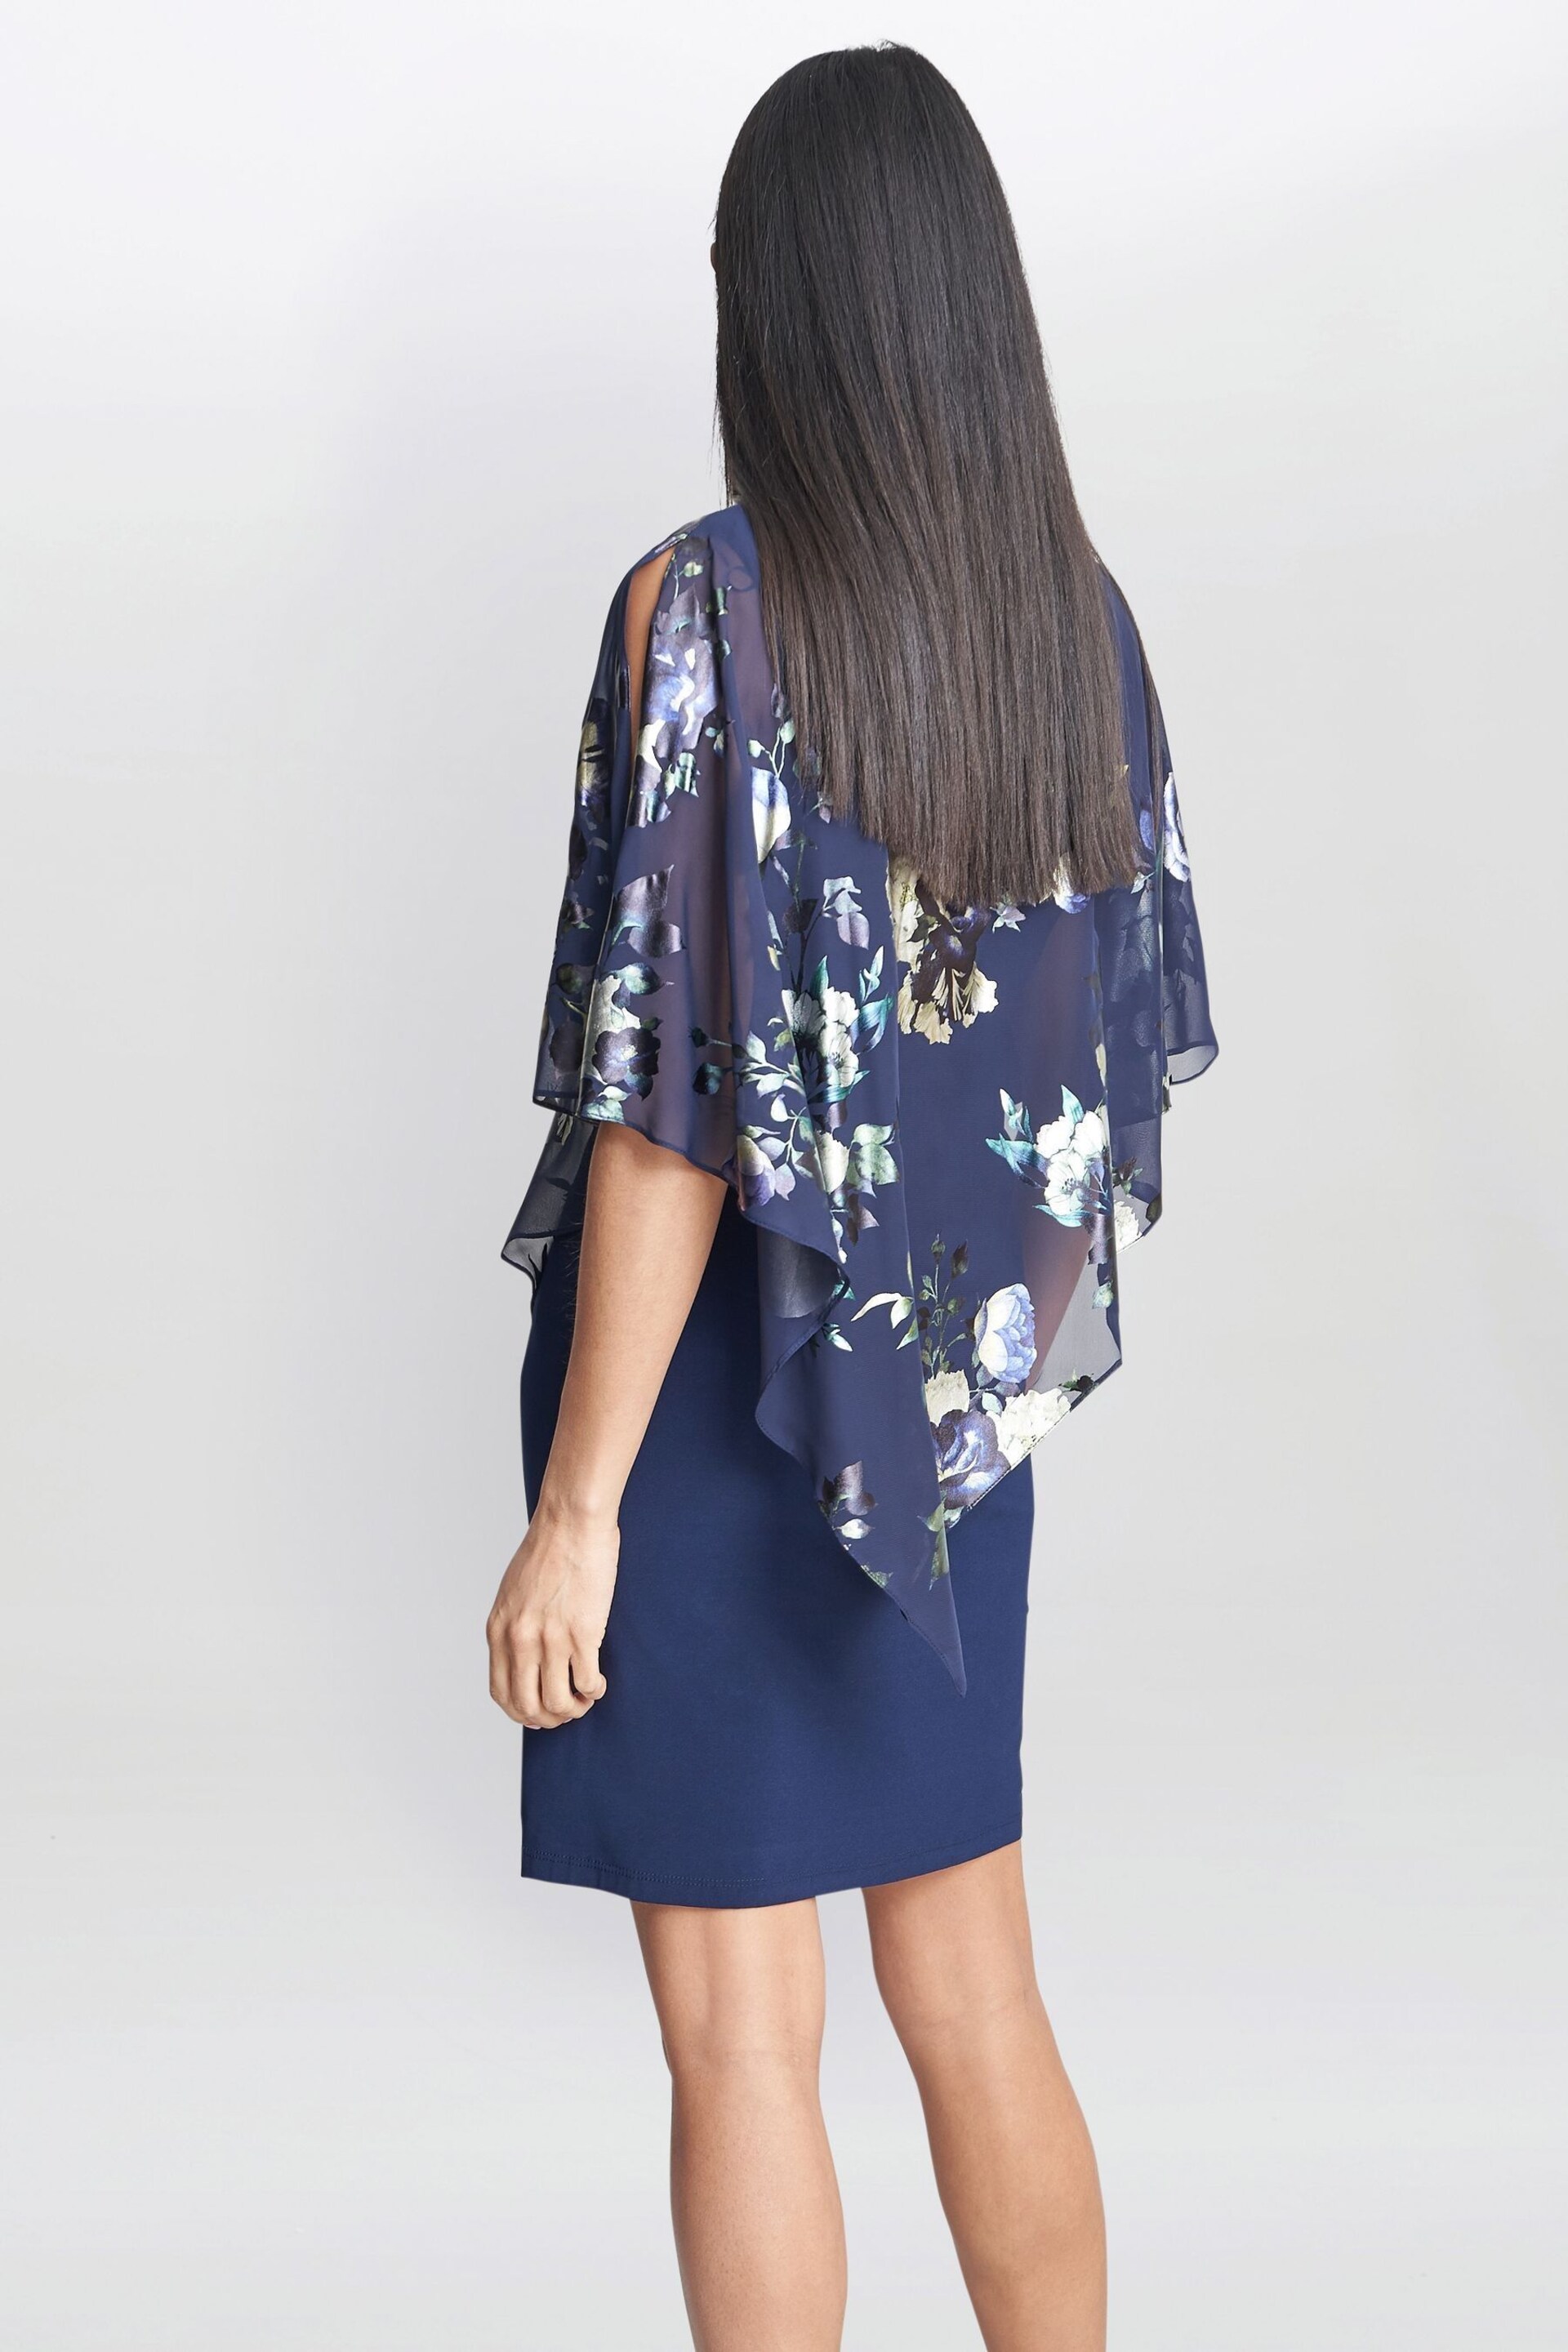 Gina Bacconi Blue Gaby Floral Printed Asymmetric Dress - Image 2 of 5